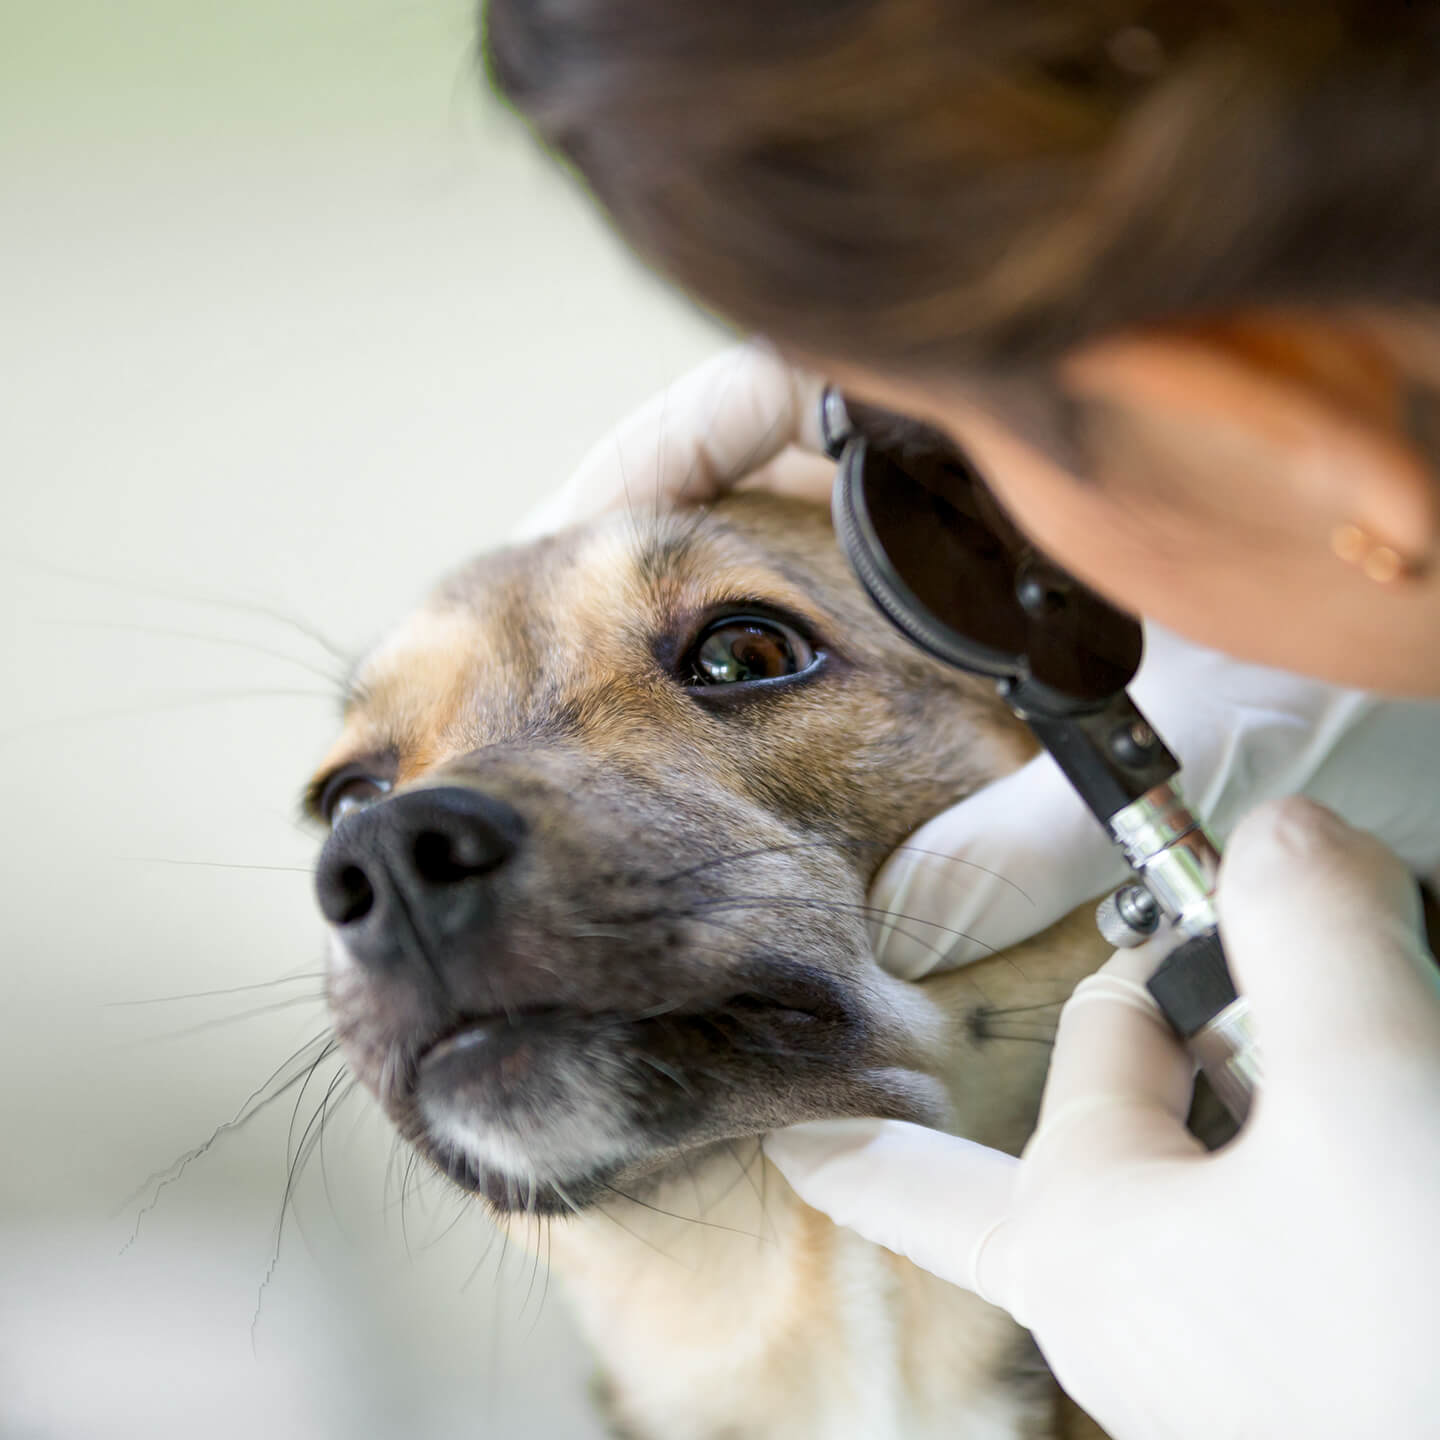 Minor Medical Care – Eye Package | VIP Petcare